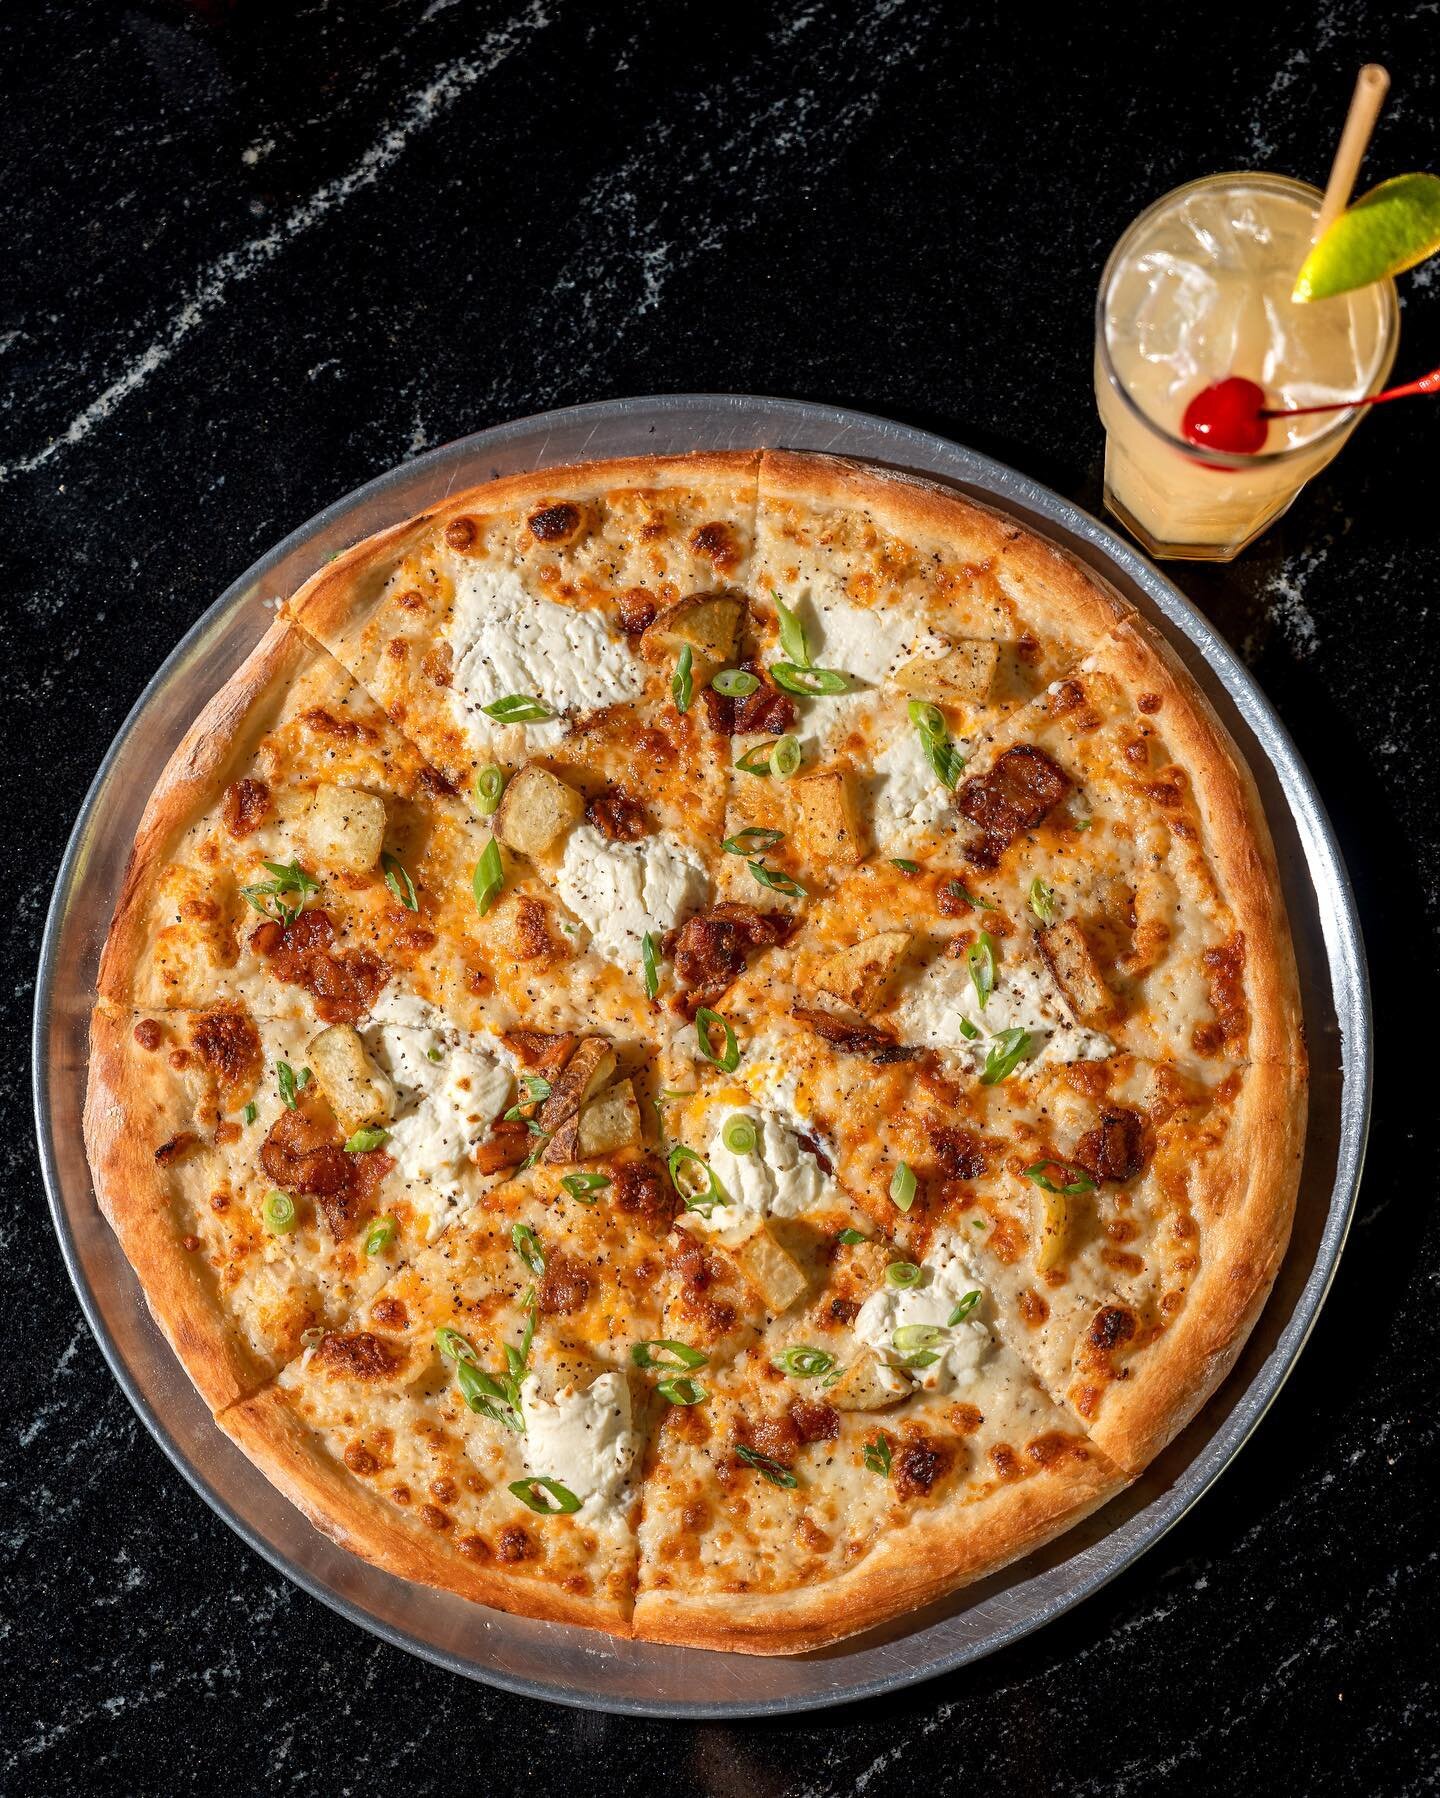 Come take shelter from the rain with us, we have the pizza and cocktails you need!

The Very Baked Potato: (May POTM)
Ranch base with cheddar cheese, bacon, baked potato, sour cream, garlic, green onions and salt and pepper.